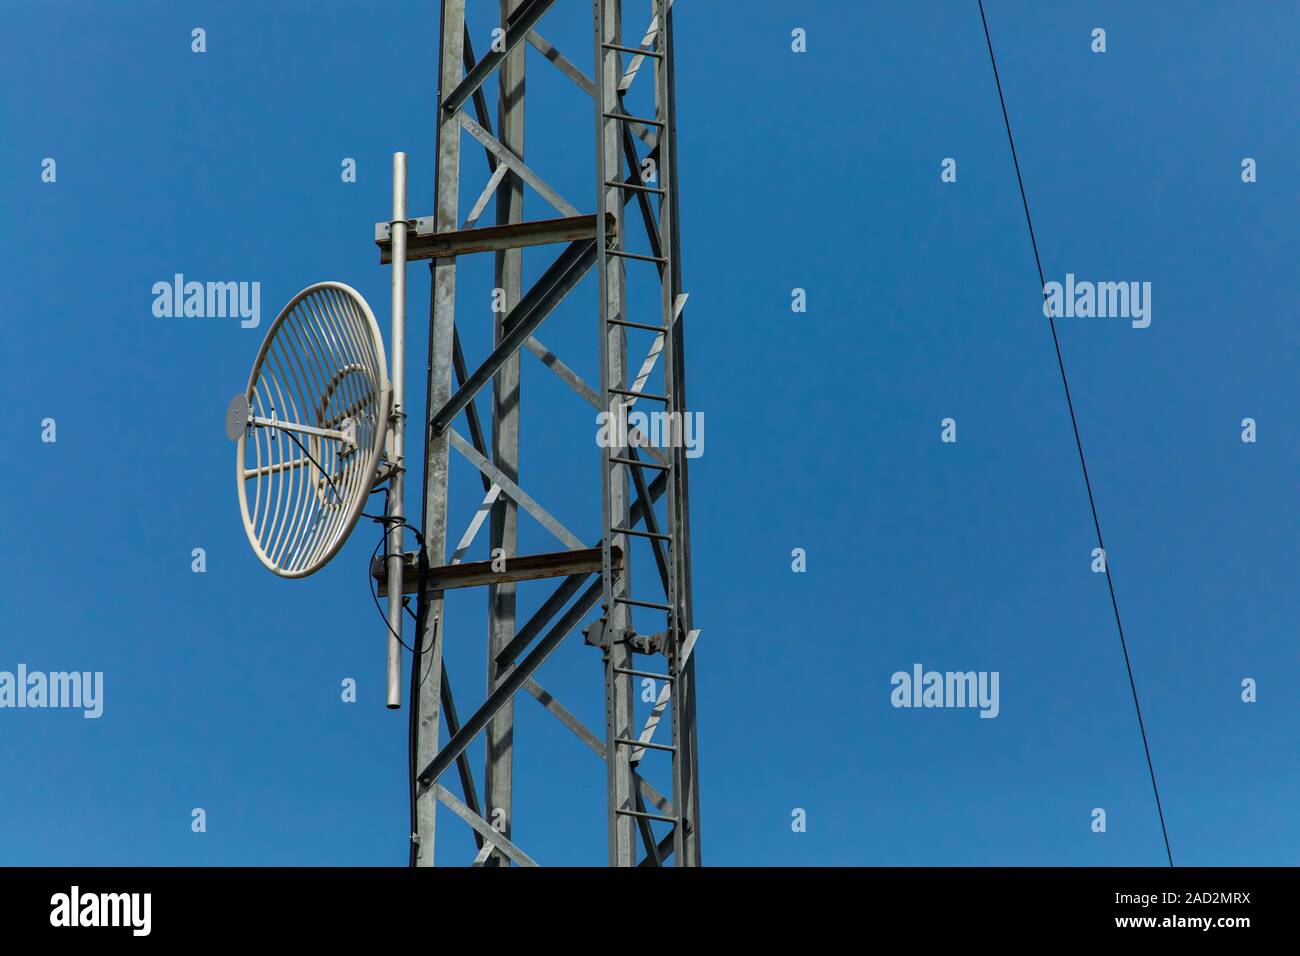 small communication satellite on the tower in an electrical substation, against the sky, Used for remote control and monitoring of the substations Stock Photo